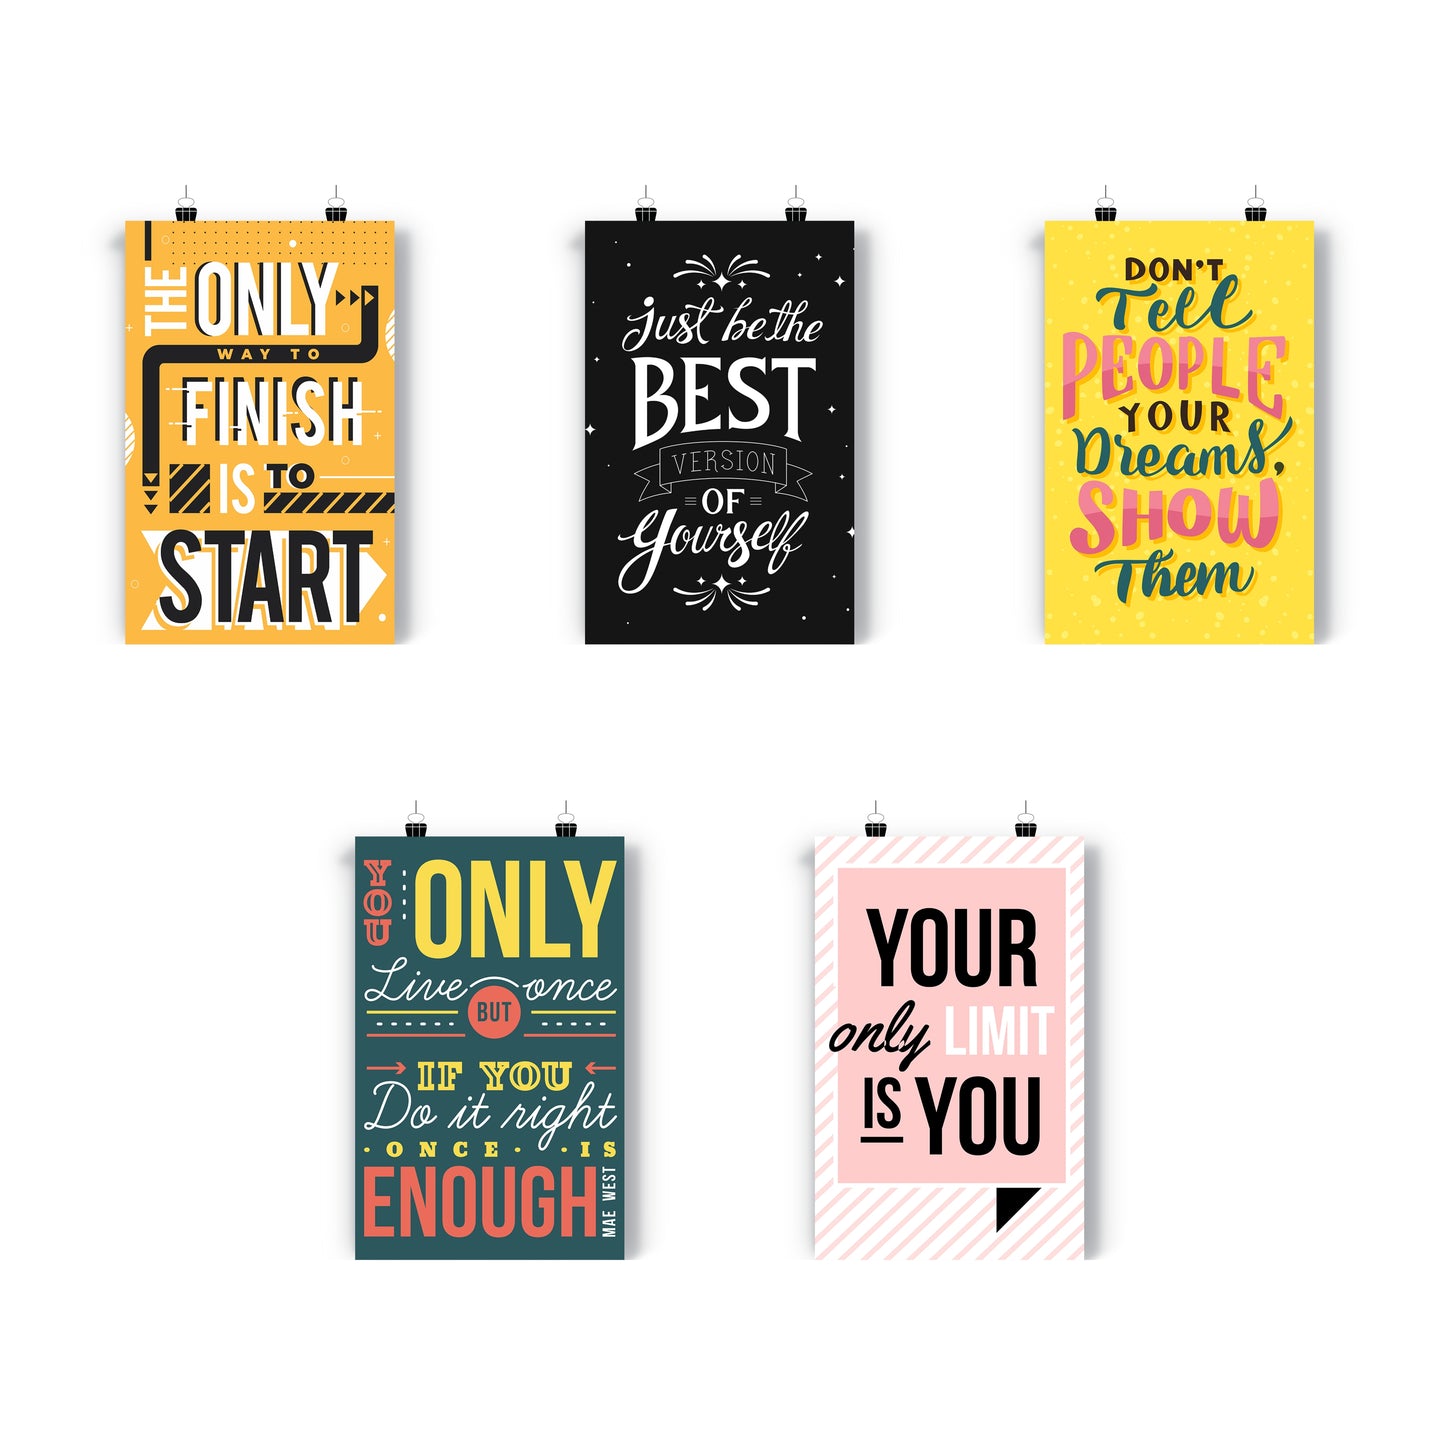 iberry's Motivational Quote Posters for Office and Student Room Walls |motivational posters (Size 28 x 43 CM, Pack of 10)-C